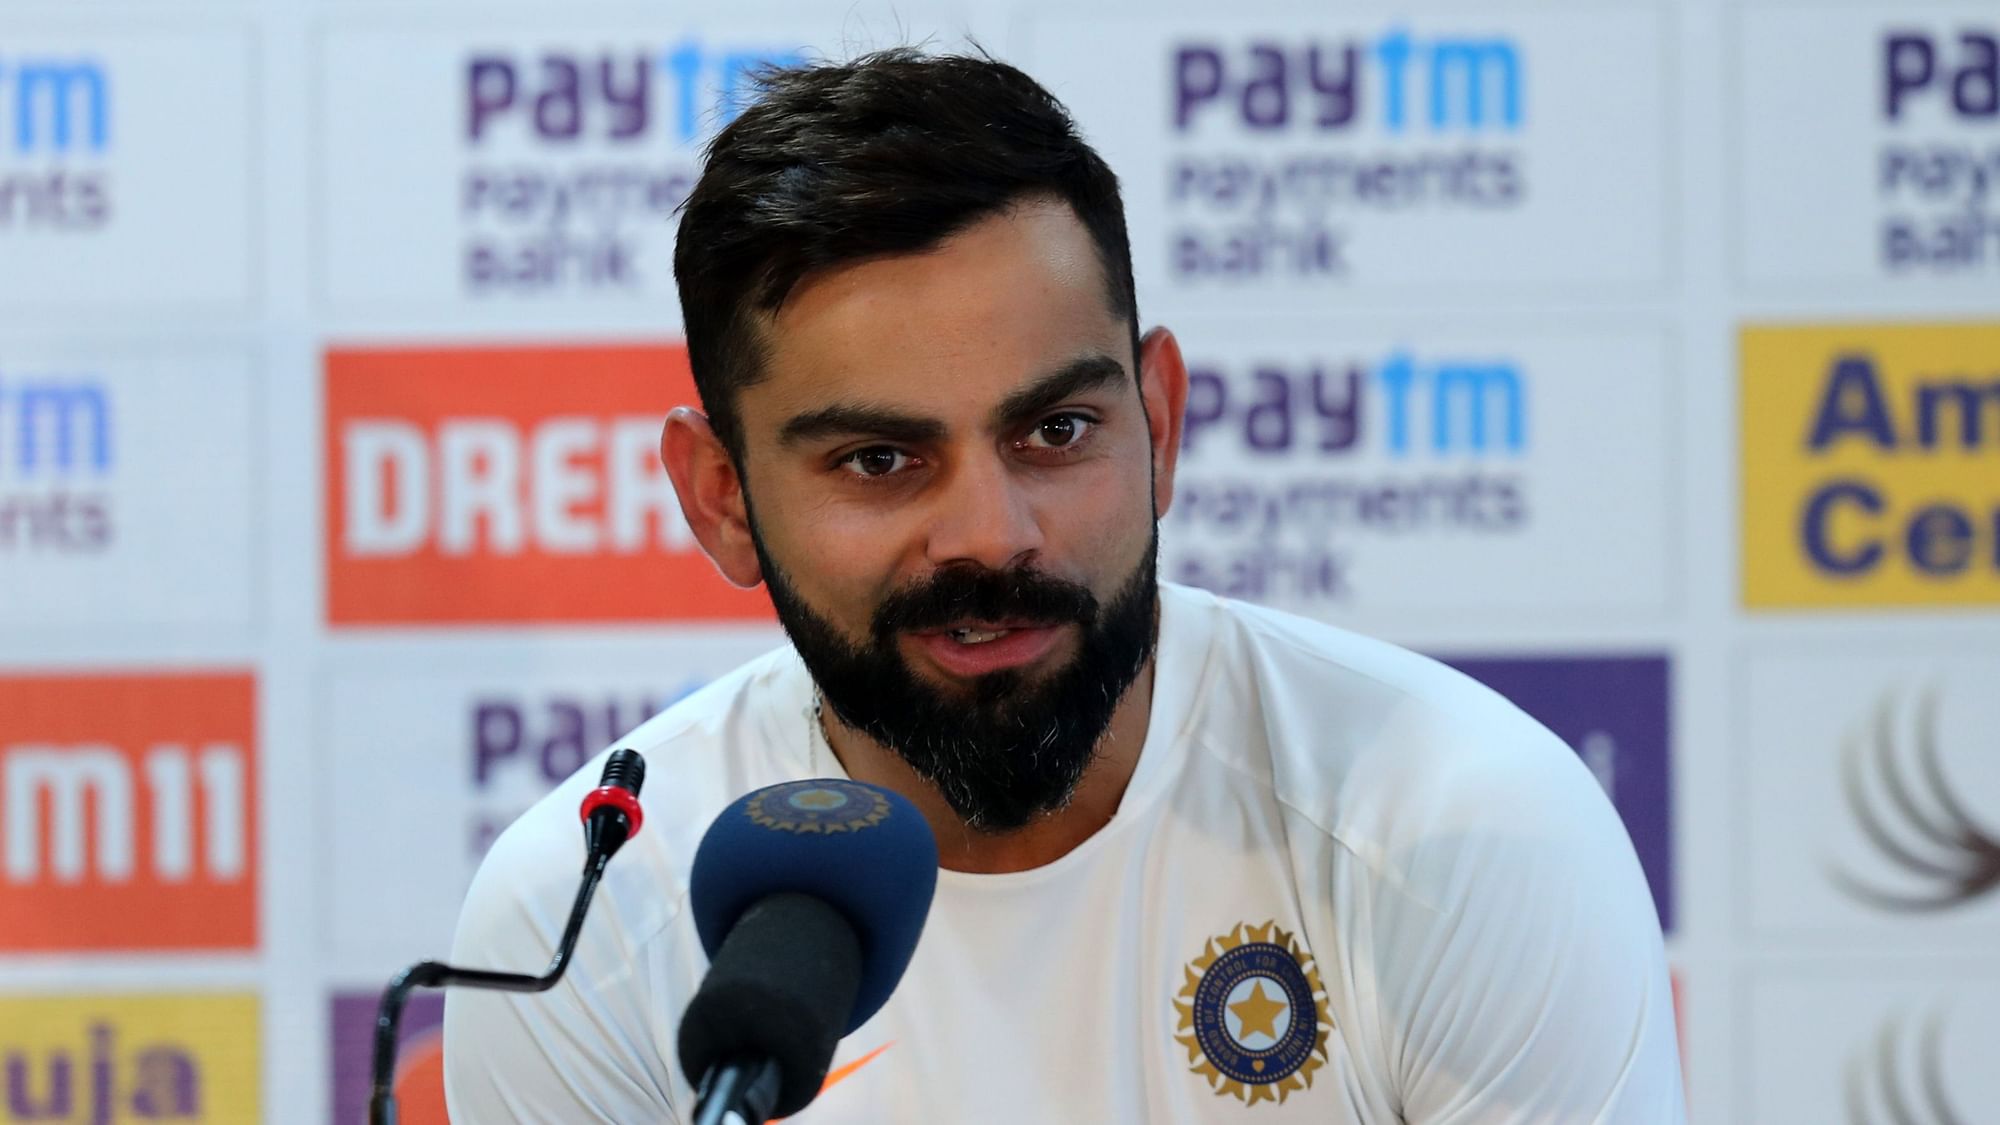 Virat Kohli at the post-match press conference after India’s innings and 202-run win over South Africa at Ranchi.